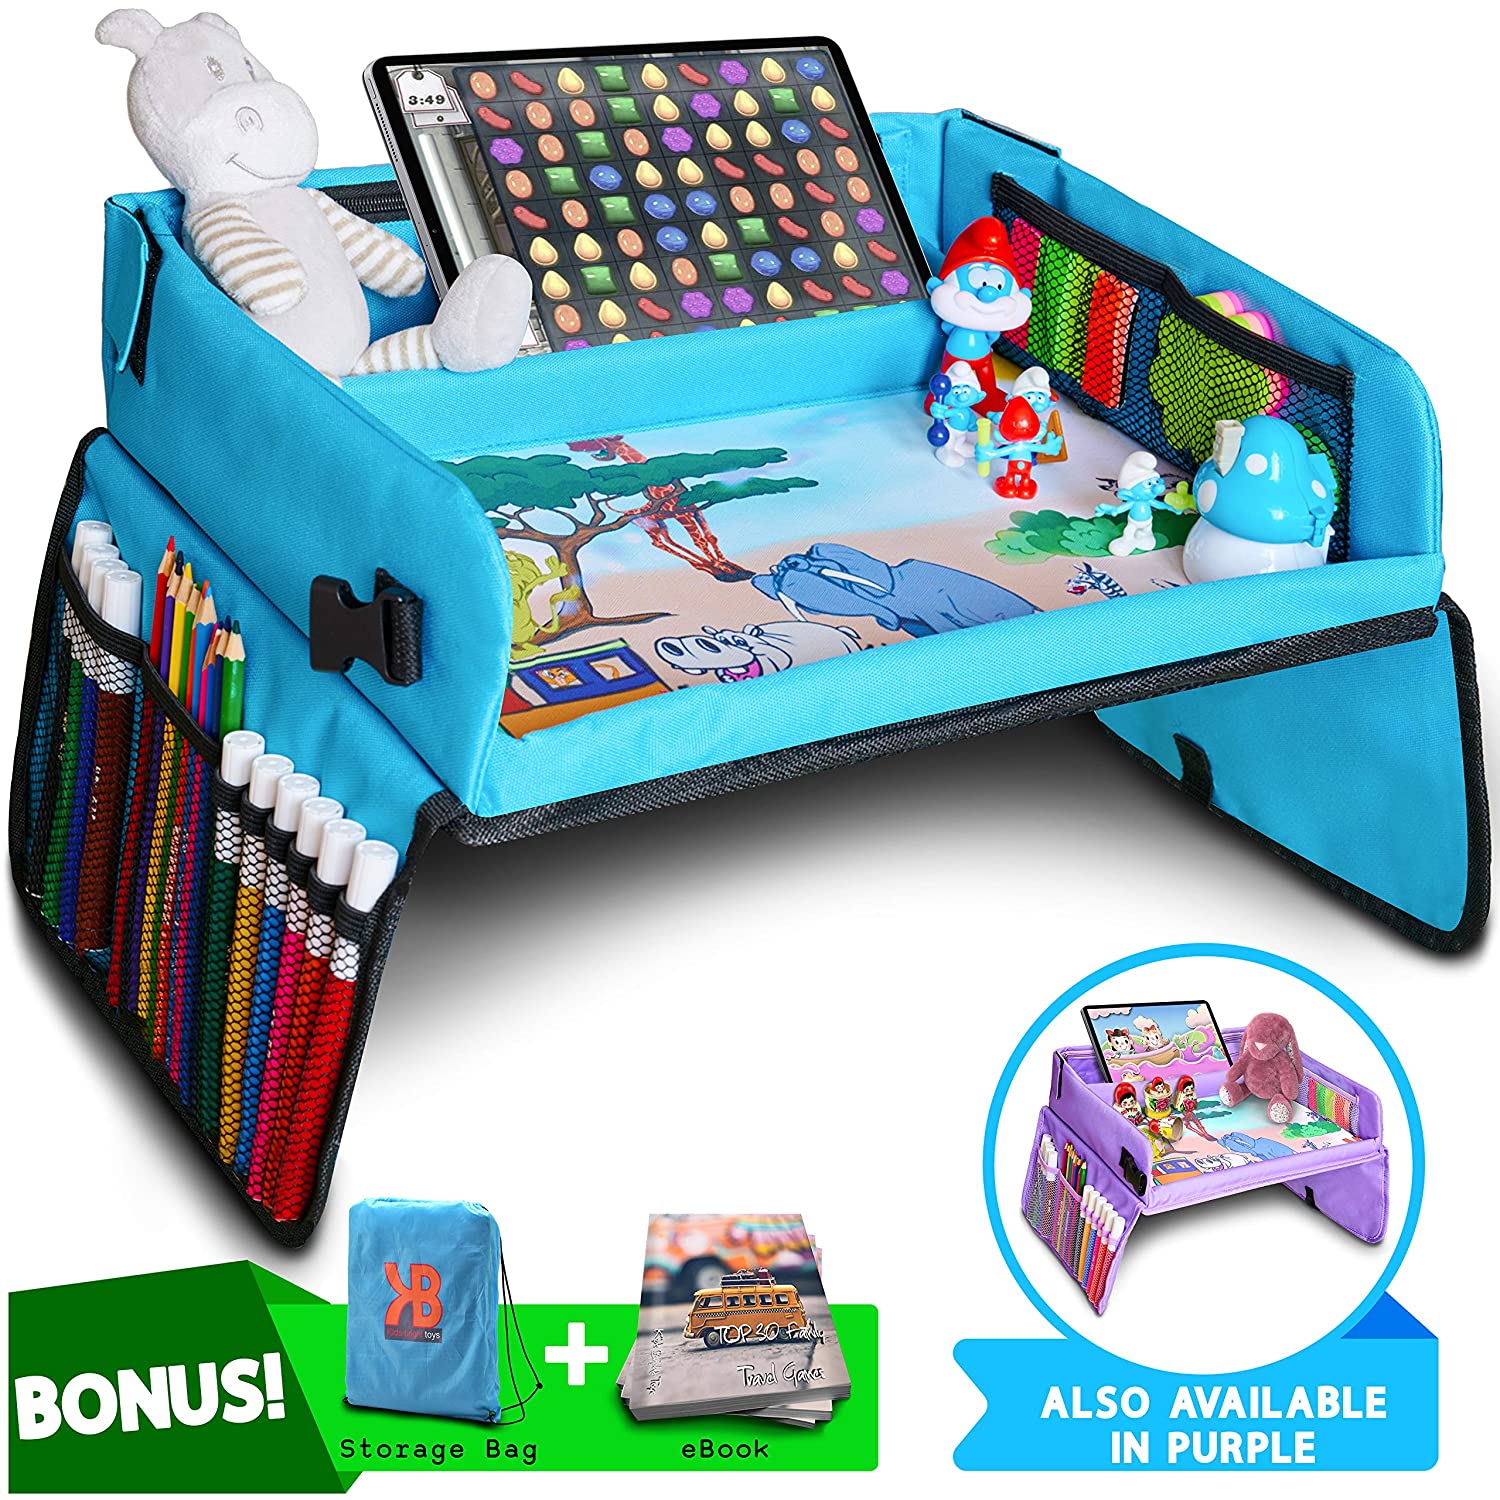 Kids Travel Tray, Car Seat Tray for Toddler + Free Bag & E-Book - Keeps Children Entertained